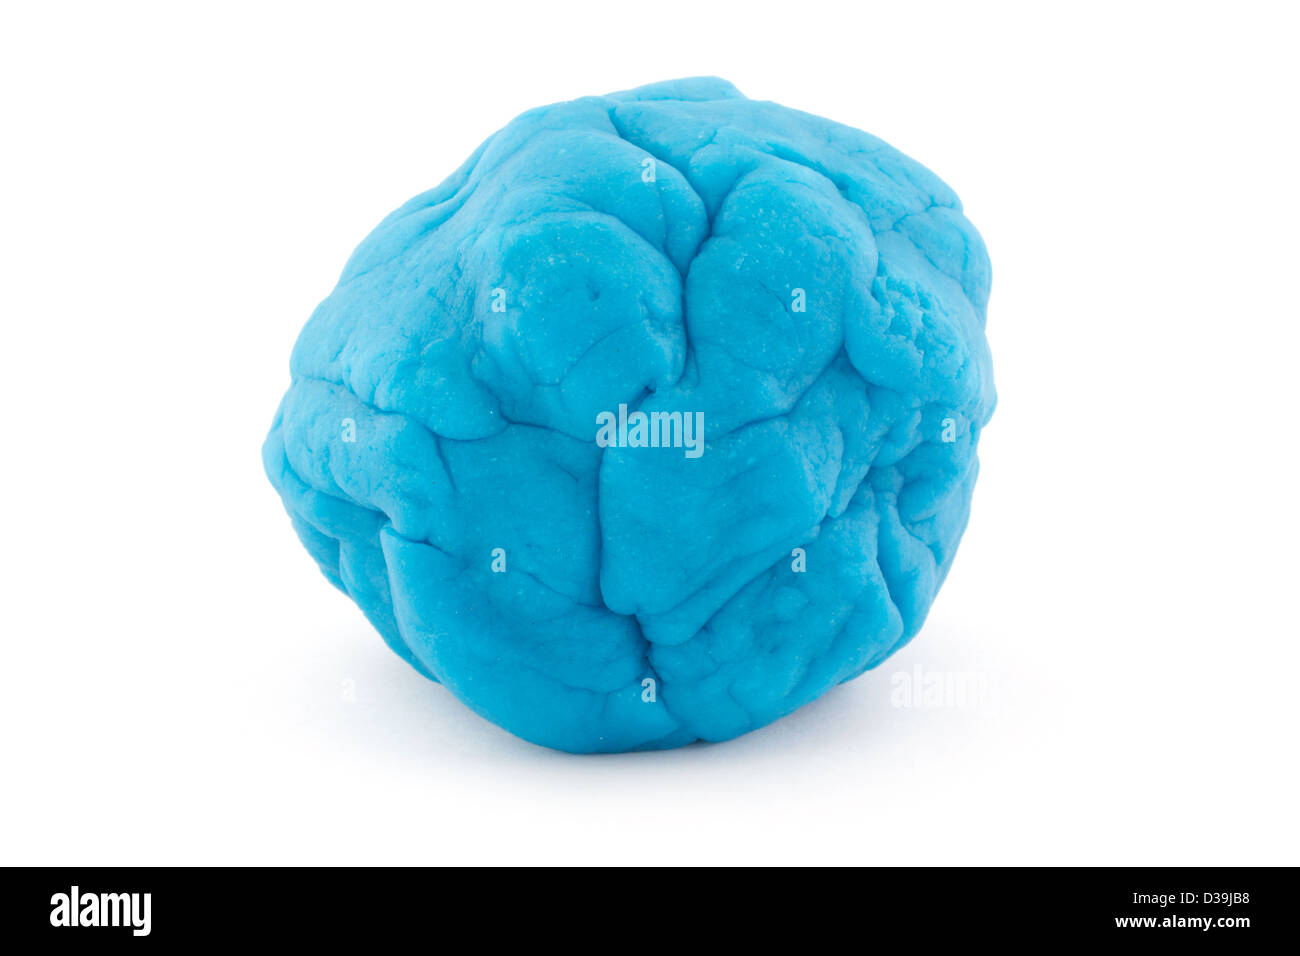 Ball of blue play dough over white Stock Photo